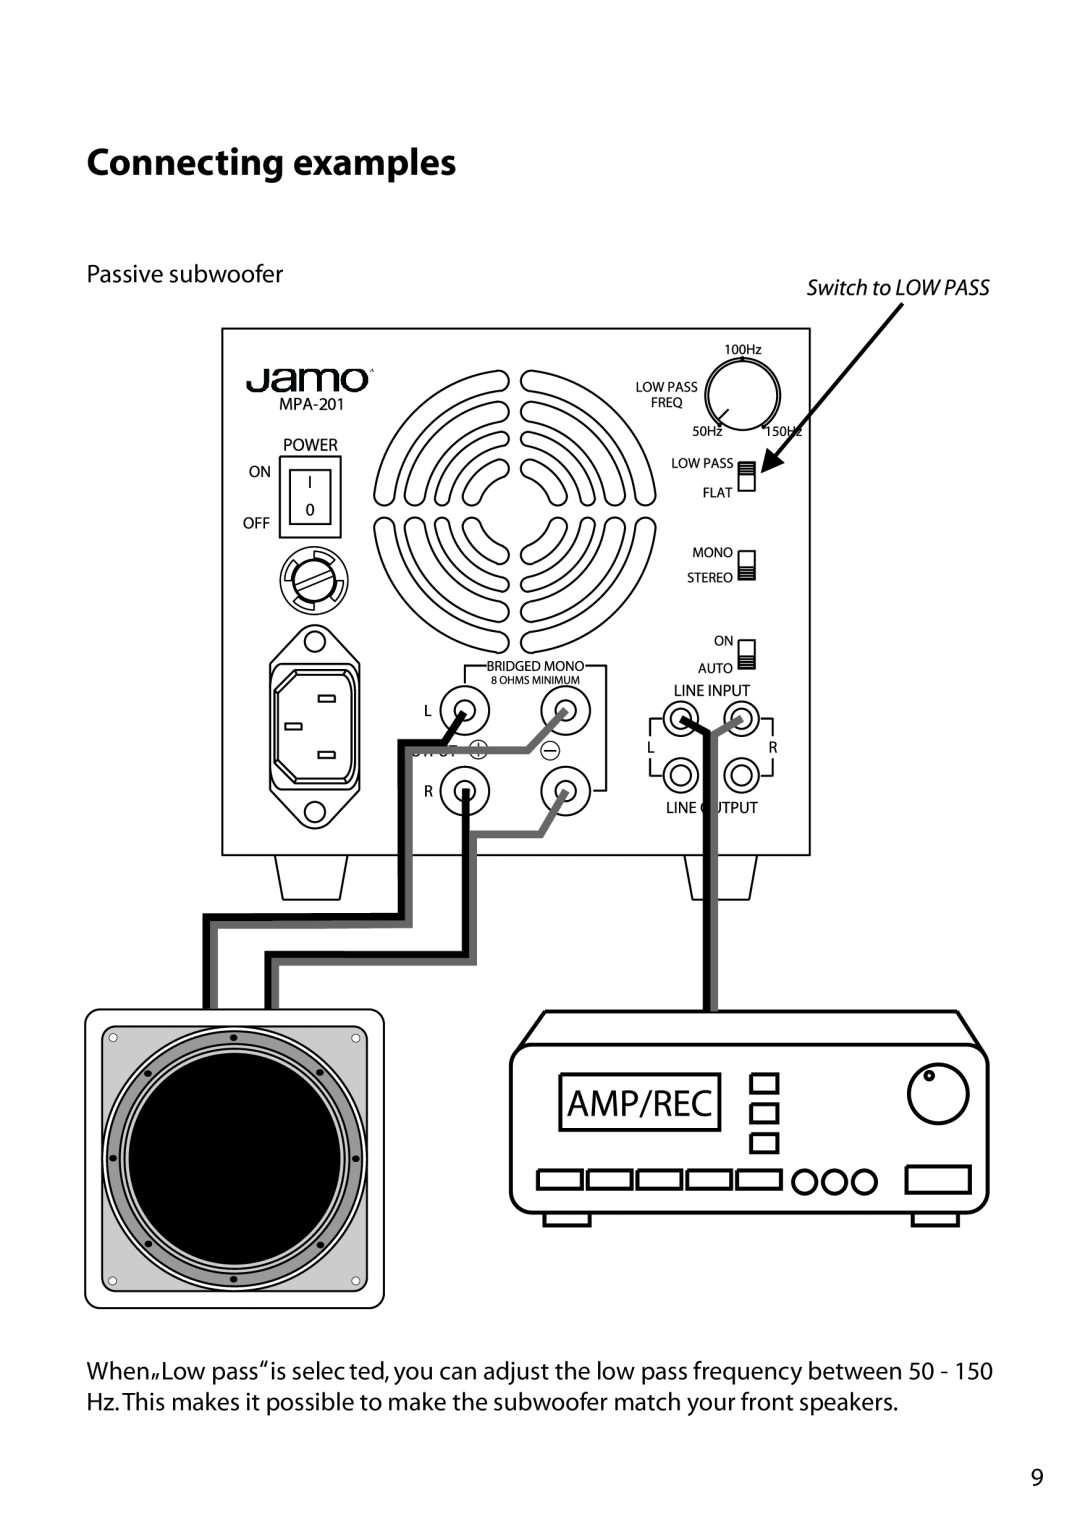 JAMO MPA-201 manual Connecting examples, Passive subwoofer 